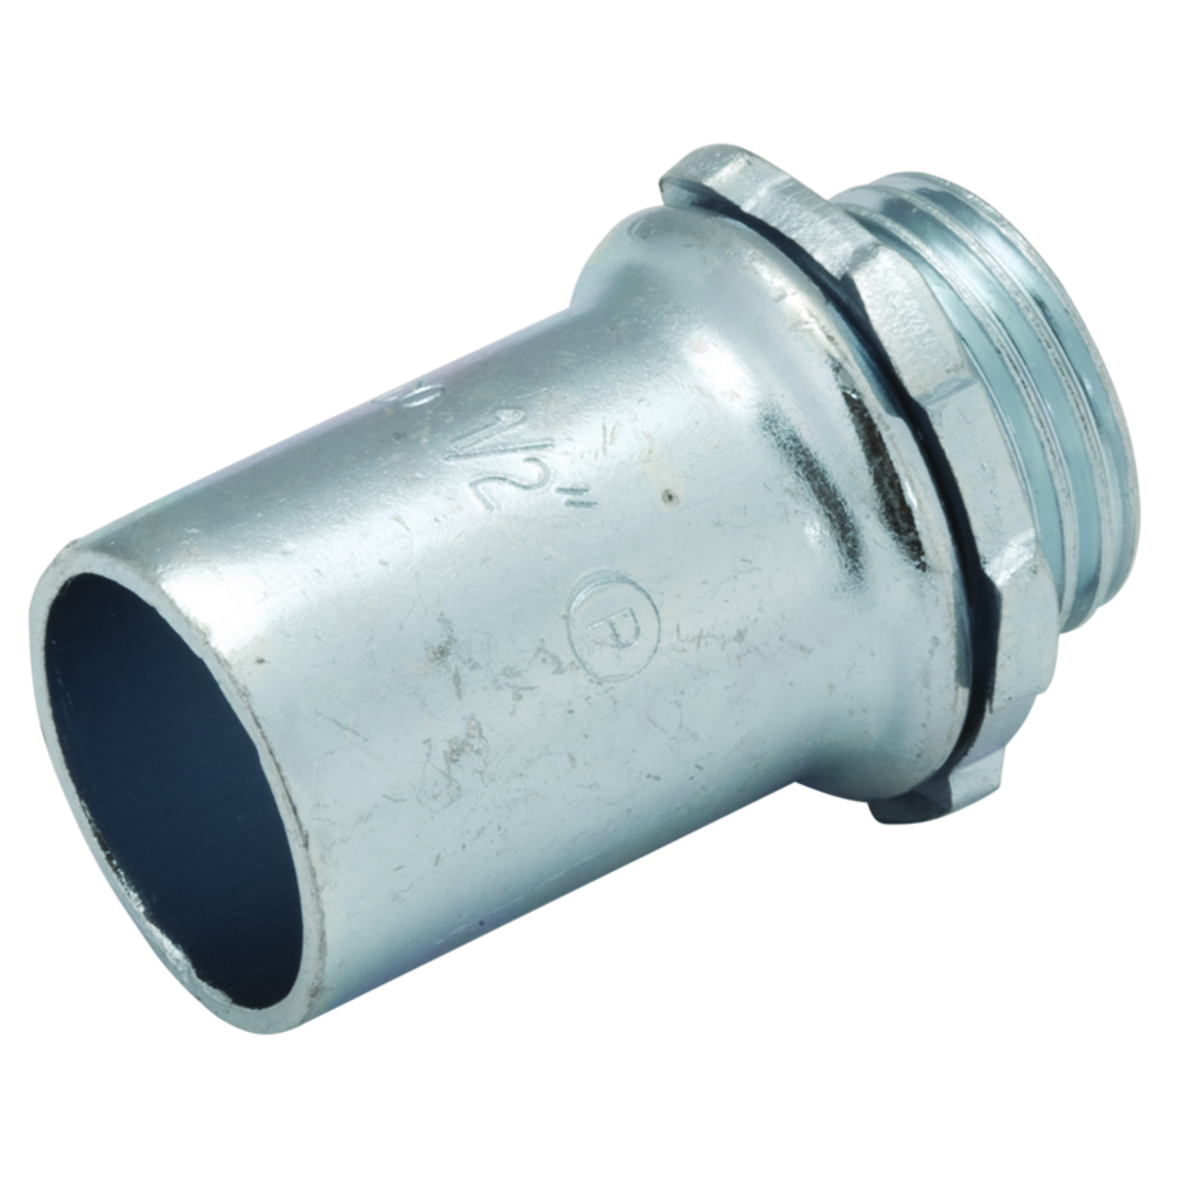 Indenter Connectors Steel, Uninsulated 1/2 In. Trade Size